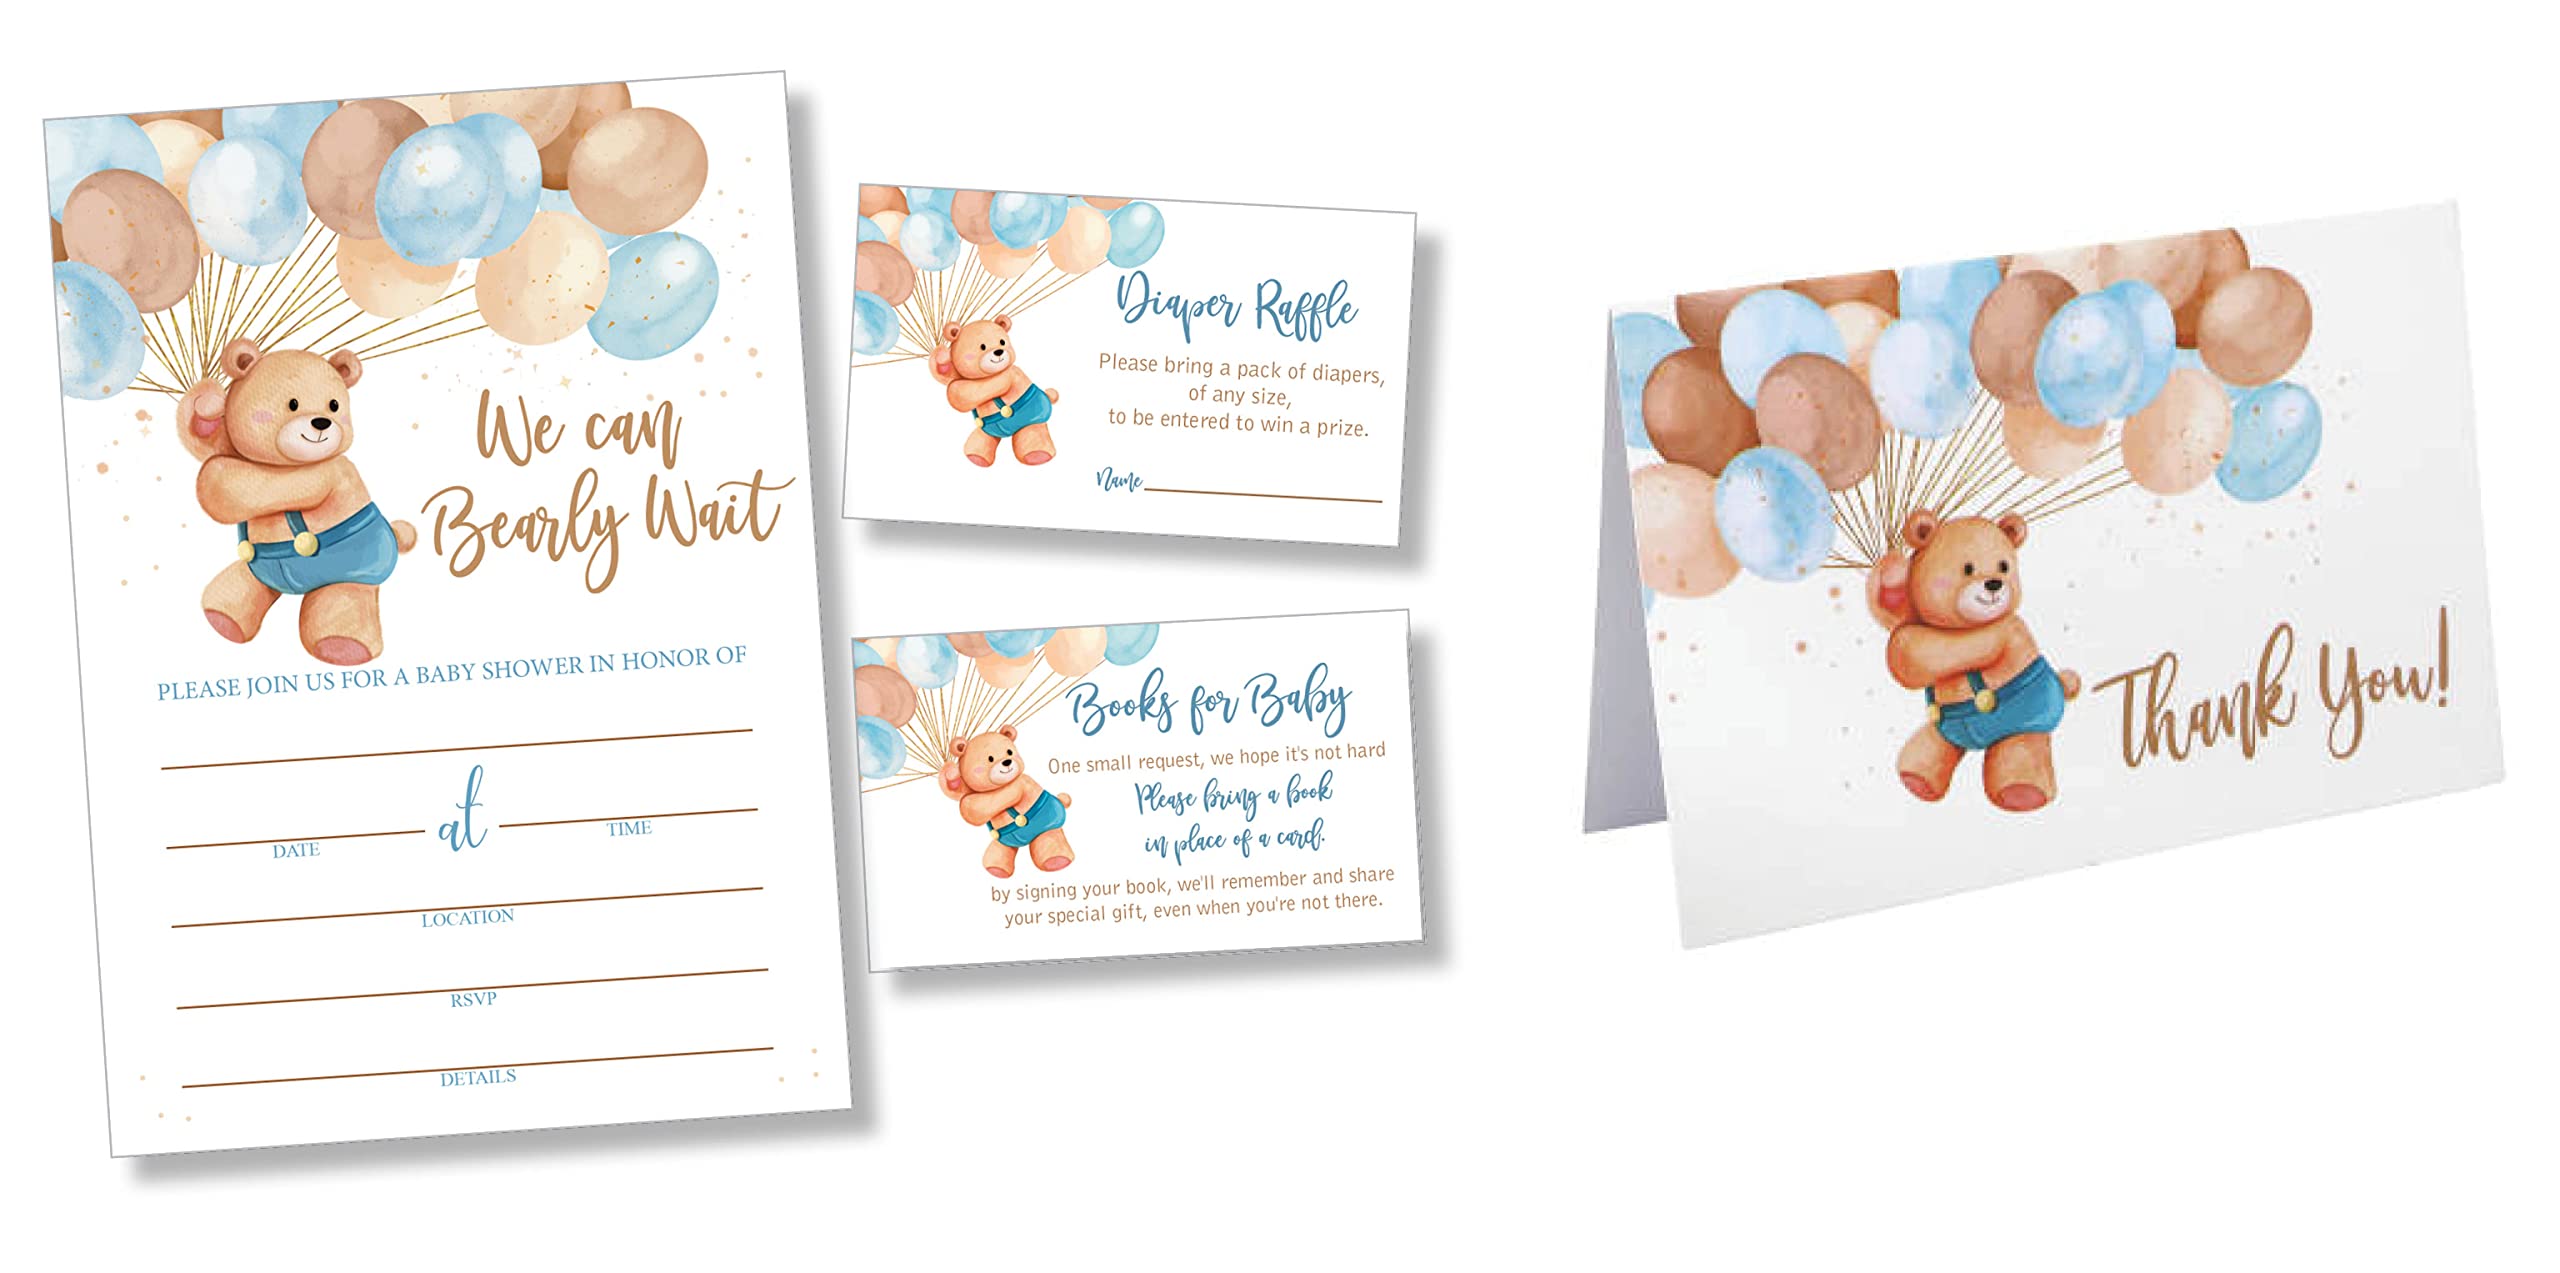 25 Teddy Bear Balloon Up Up and Away Can Bearly Wait Boy Baby Shower Invitations (Large Size 5X7 inches), Diaper Raffle Tickets, Book Request Cards with Envelopes and 50 Matching Thank You Cards Boxed